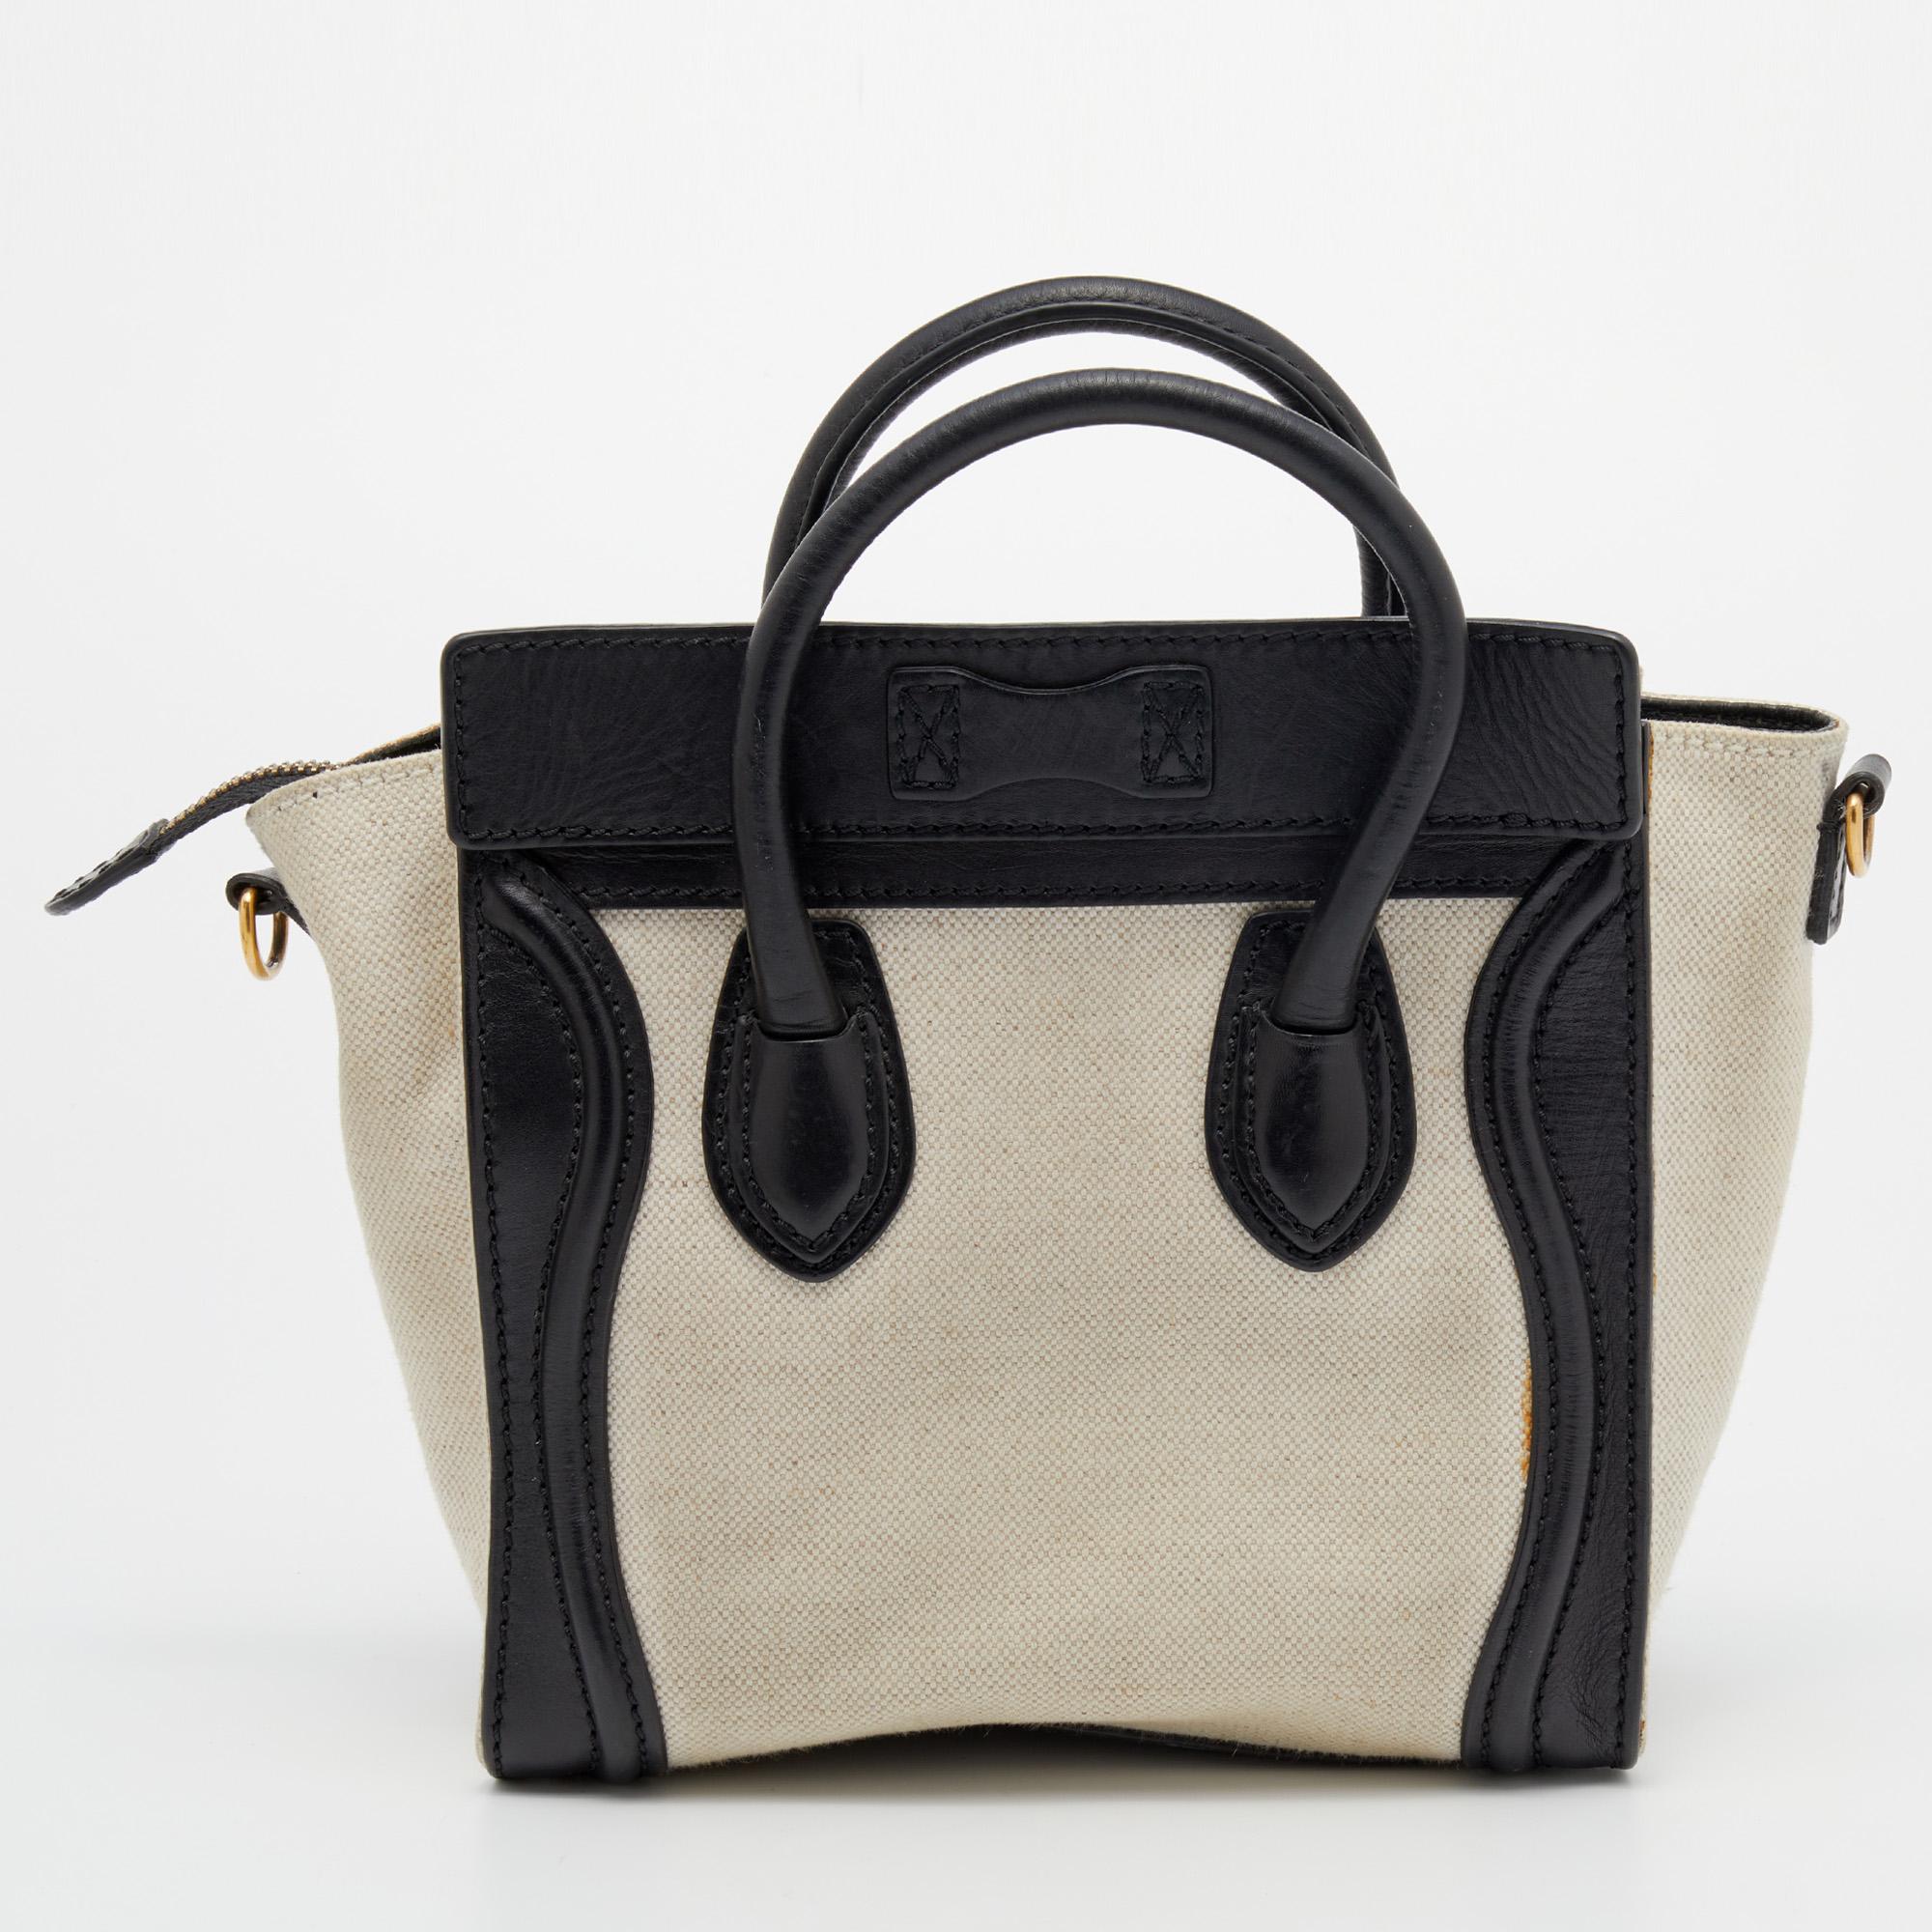 The Nano Luggage tote from Celine is one of the most popular handbags in the fashion world. This structured tote is crafted from leather and canvas and is designed in beige-black shades. It comes with dual top handles, a detachable shoulder strap,